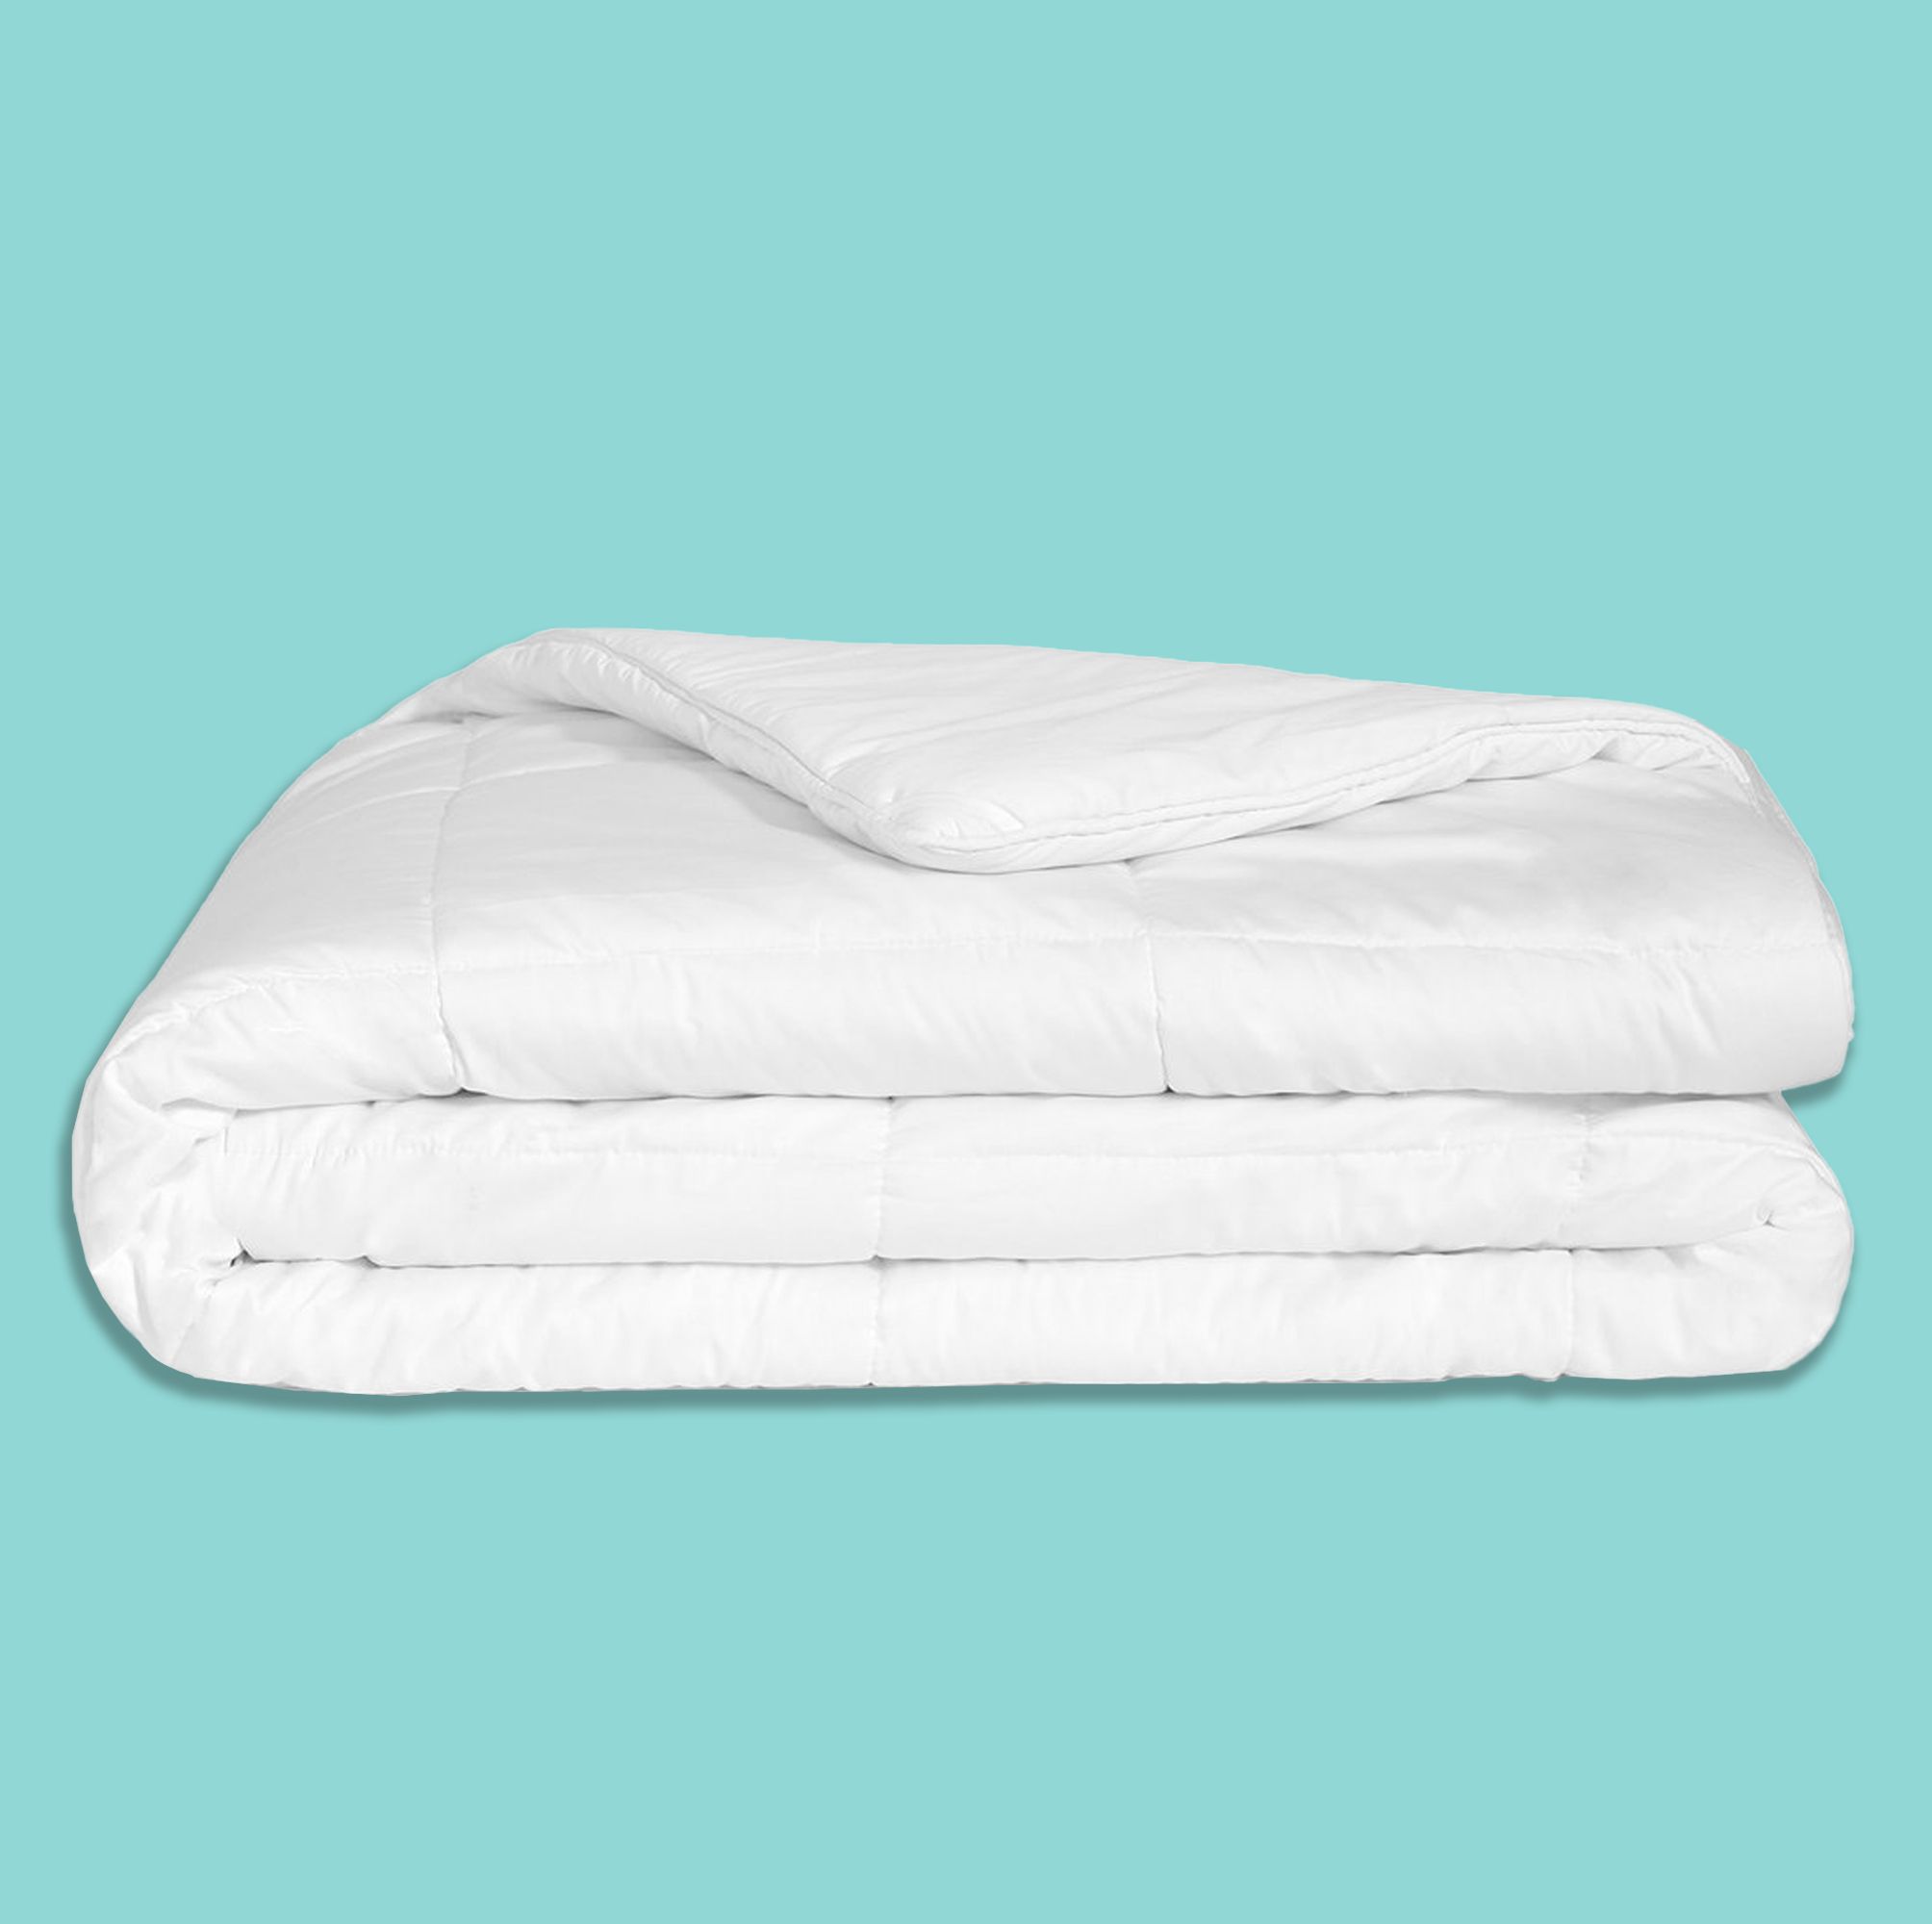 The Best Weighted Blankets to Help You Fall Asleep and Stay Asleep